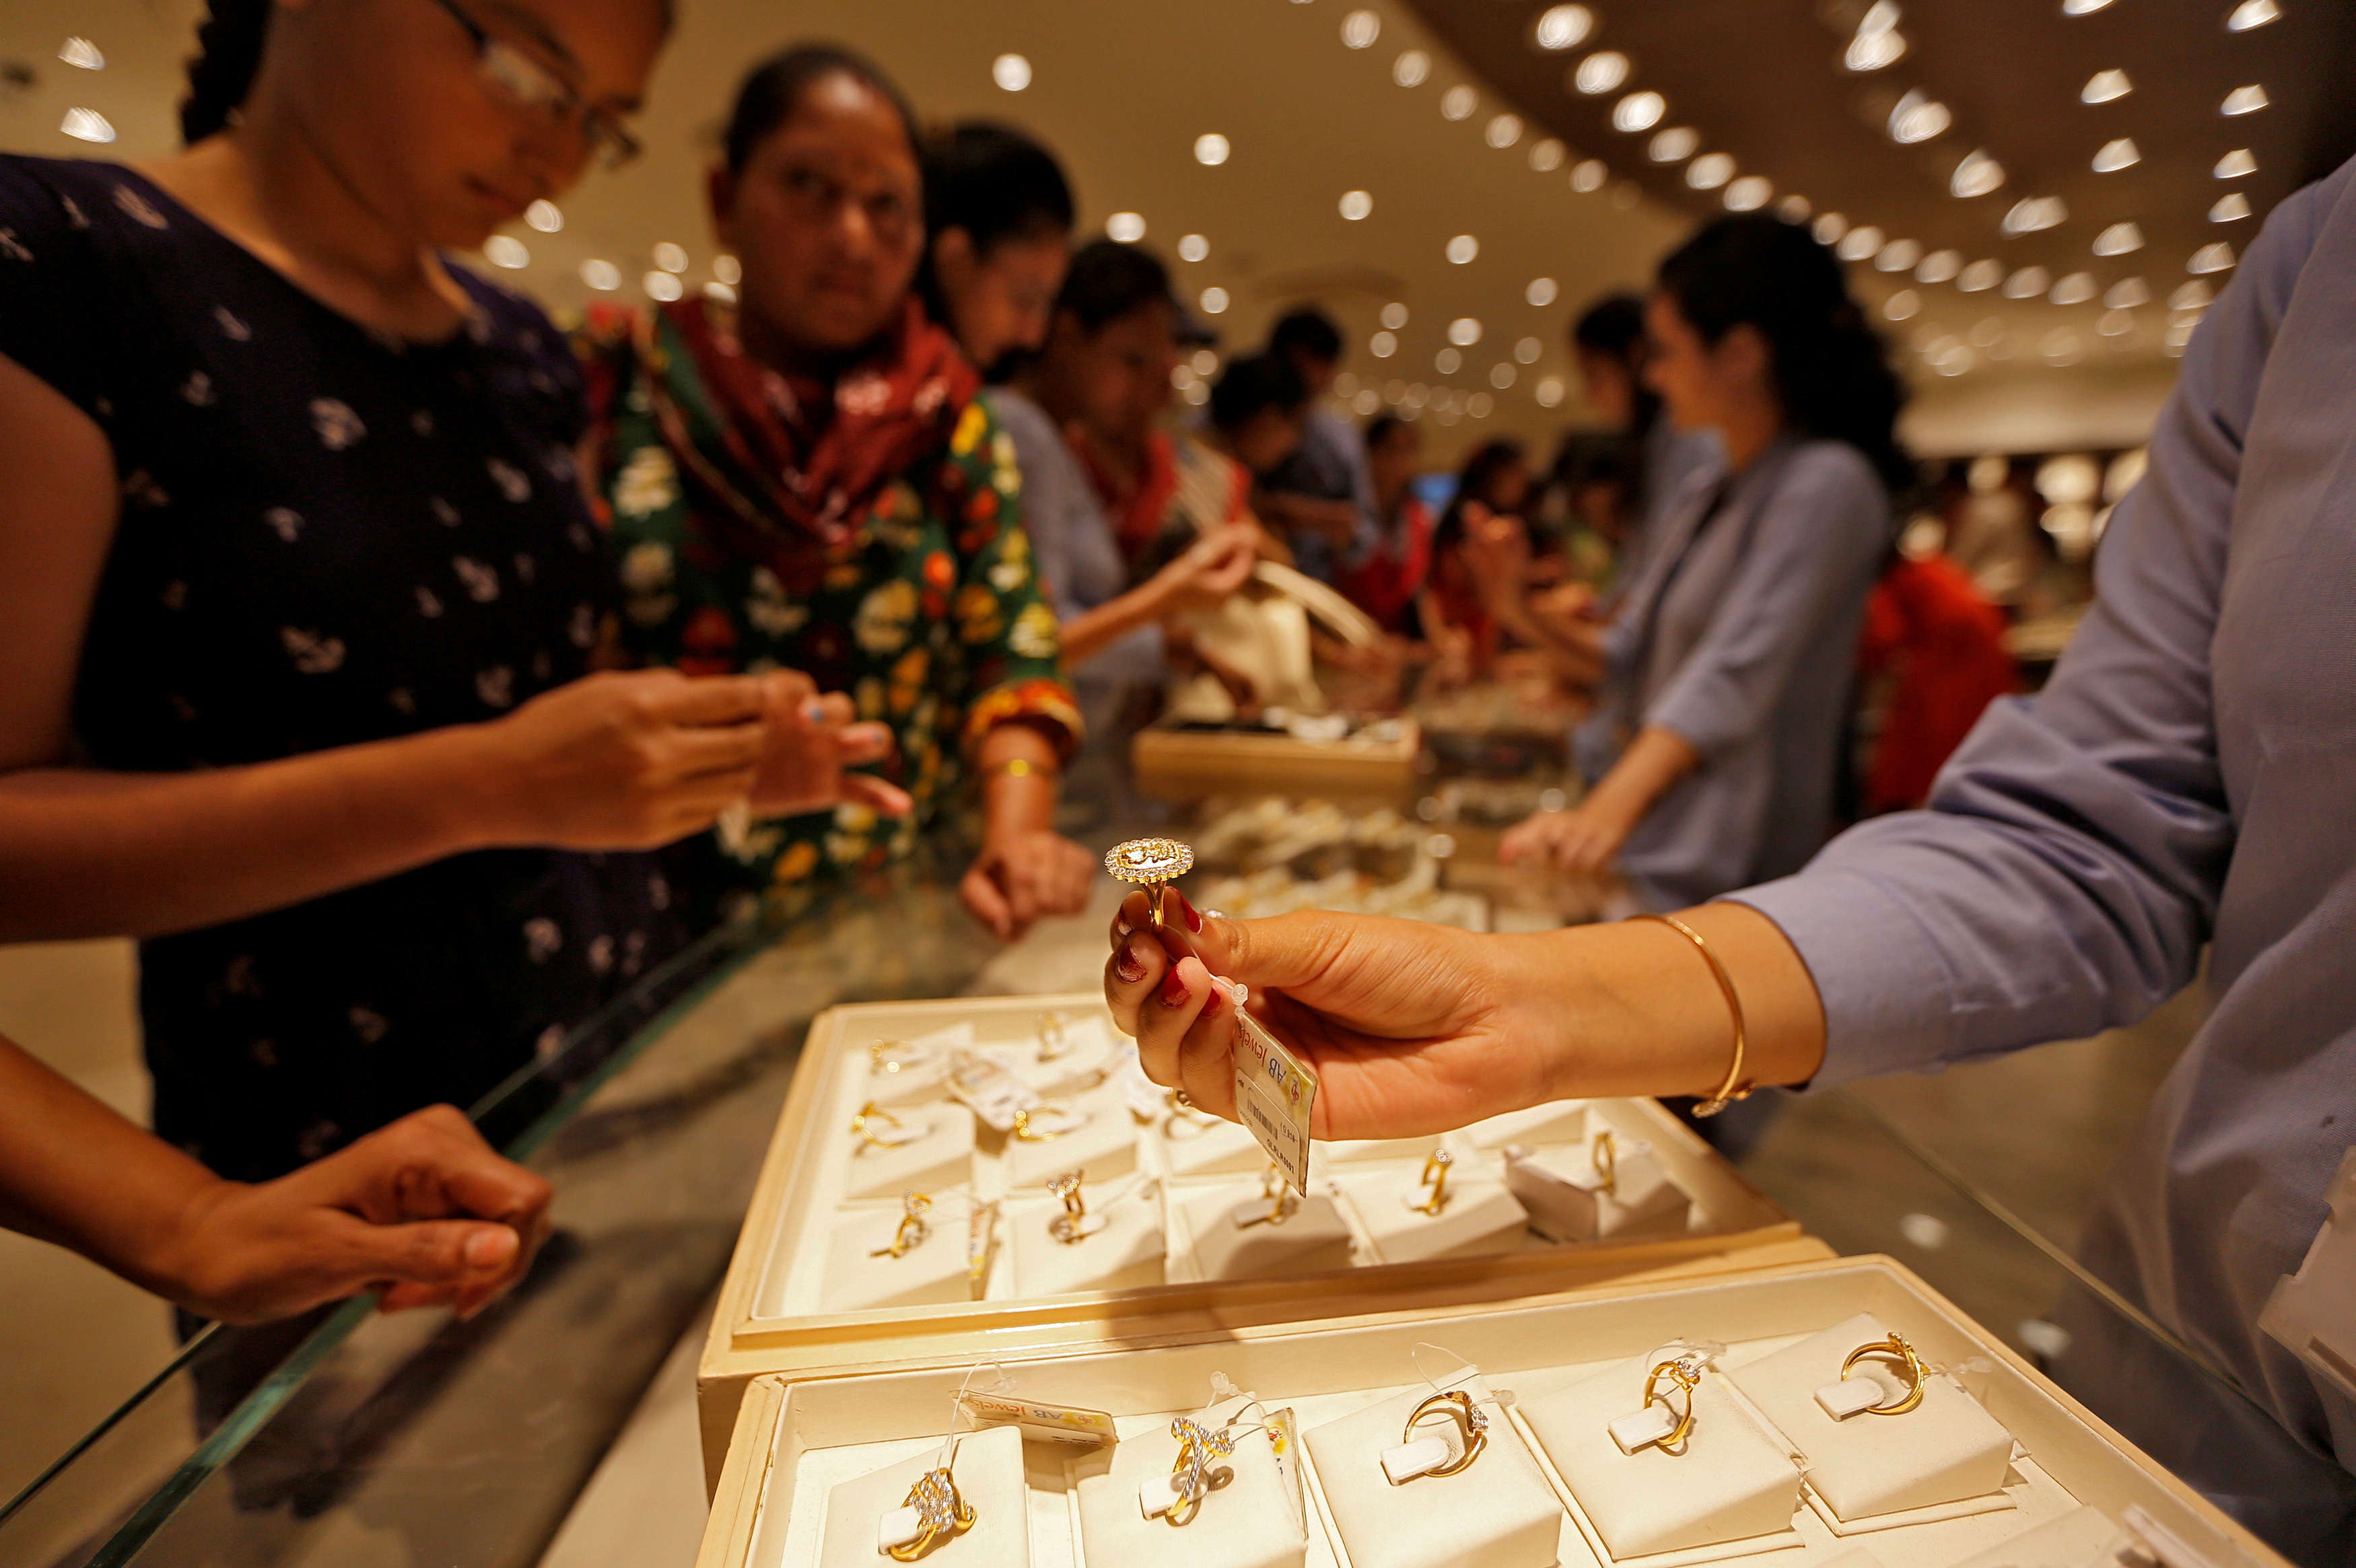 A sales person shows a gold ring to customers at a jewellery showroom during Dhanteras, a Hindu festival associated with Lakshmi, the goddess of wealth, in Ahmedabad